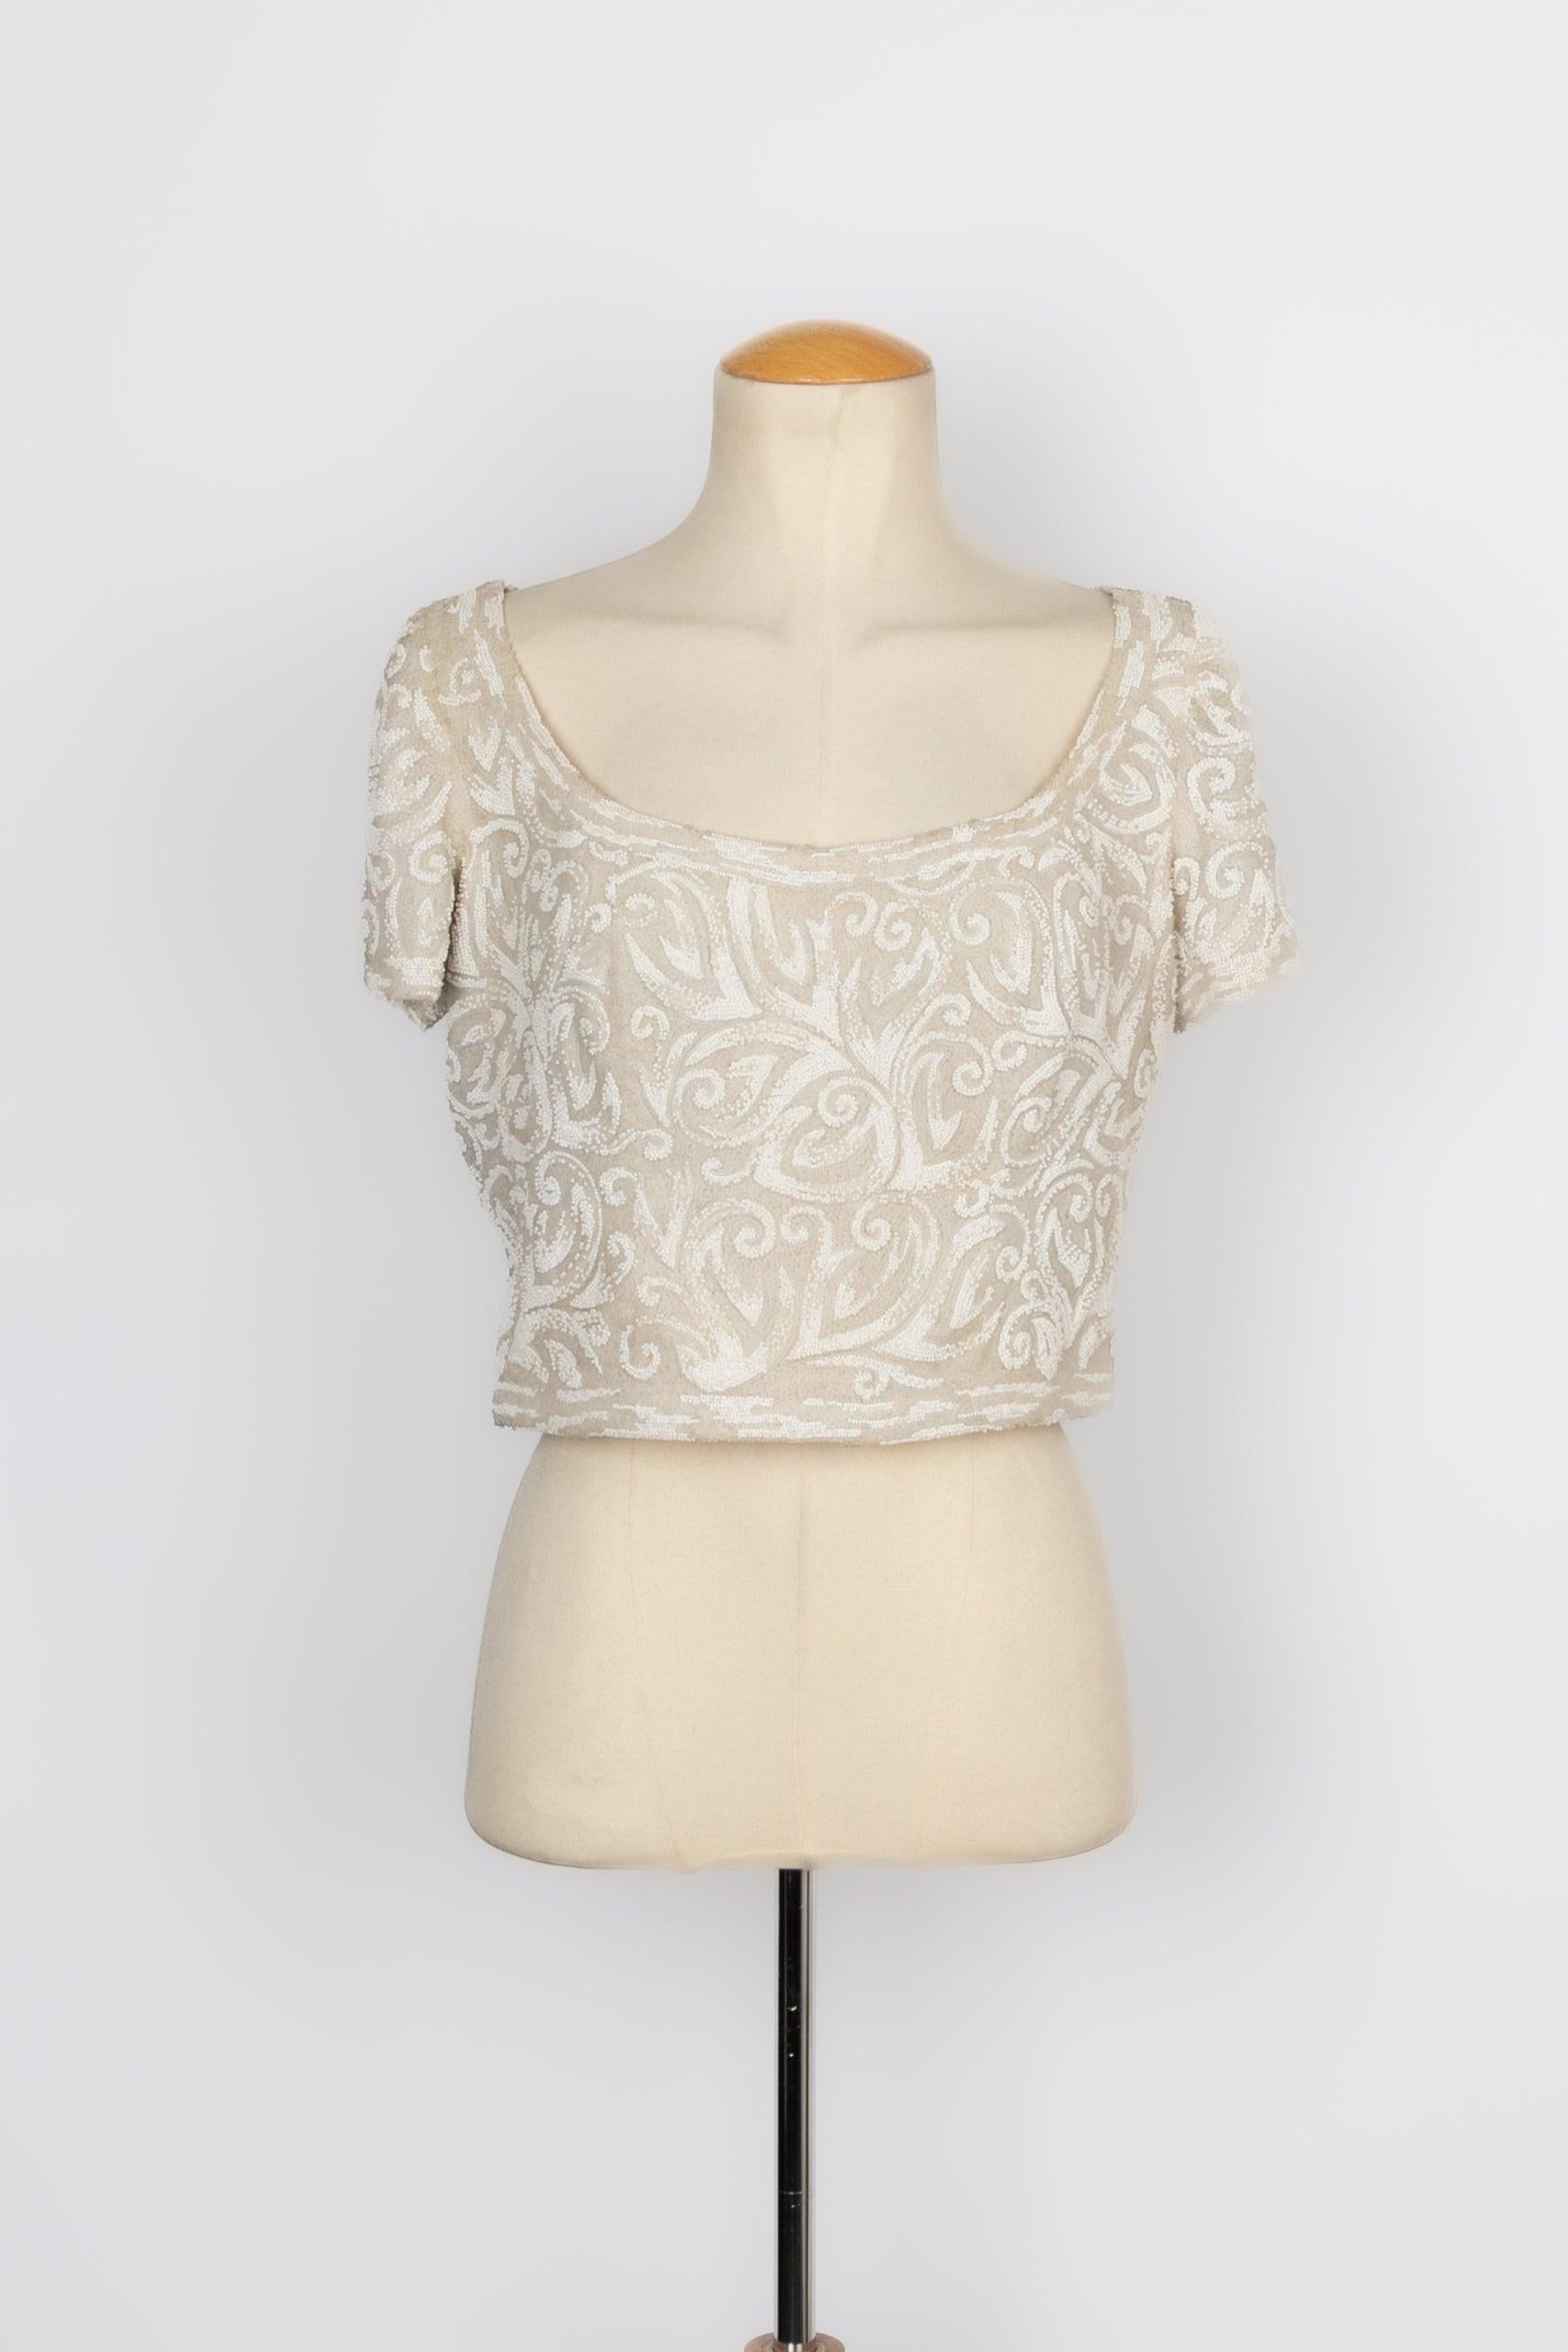 Chanel Haute Couture Set of Blouse with Crepe Skirt, 1994 For Sale 1